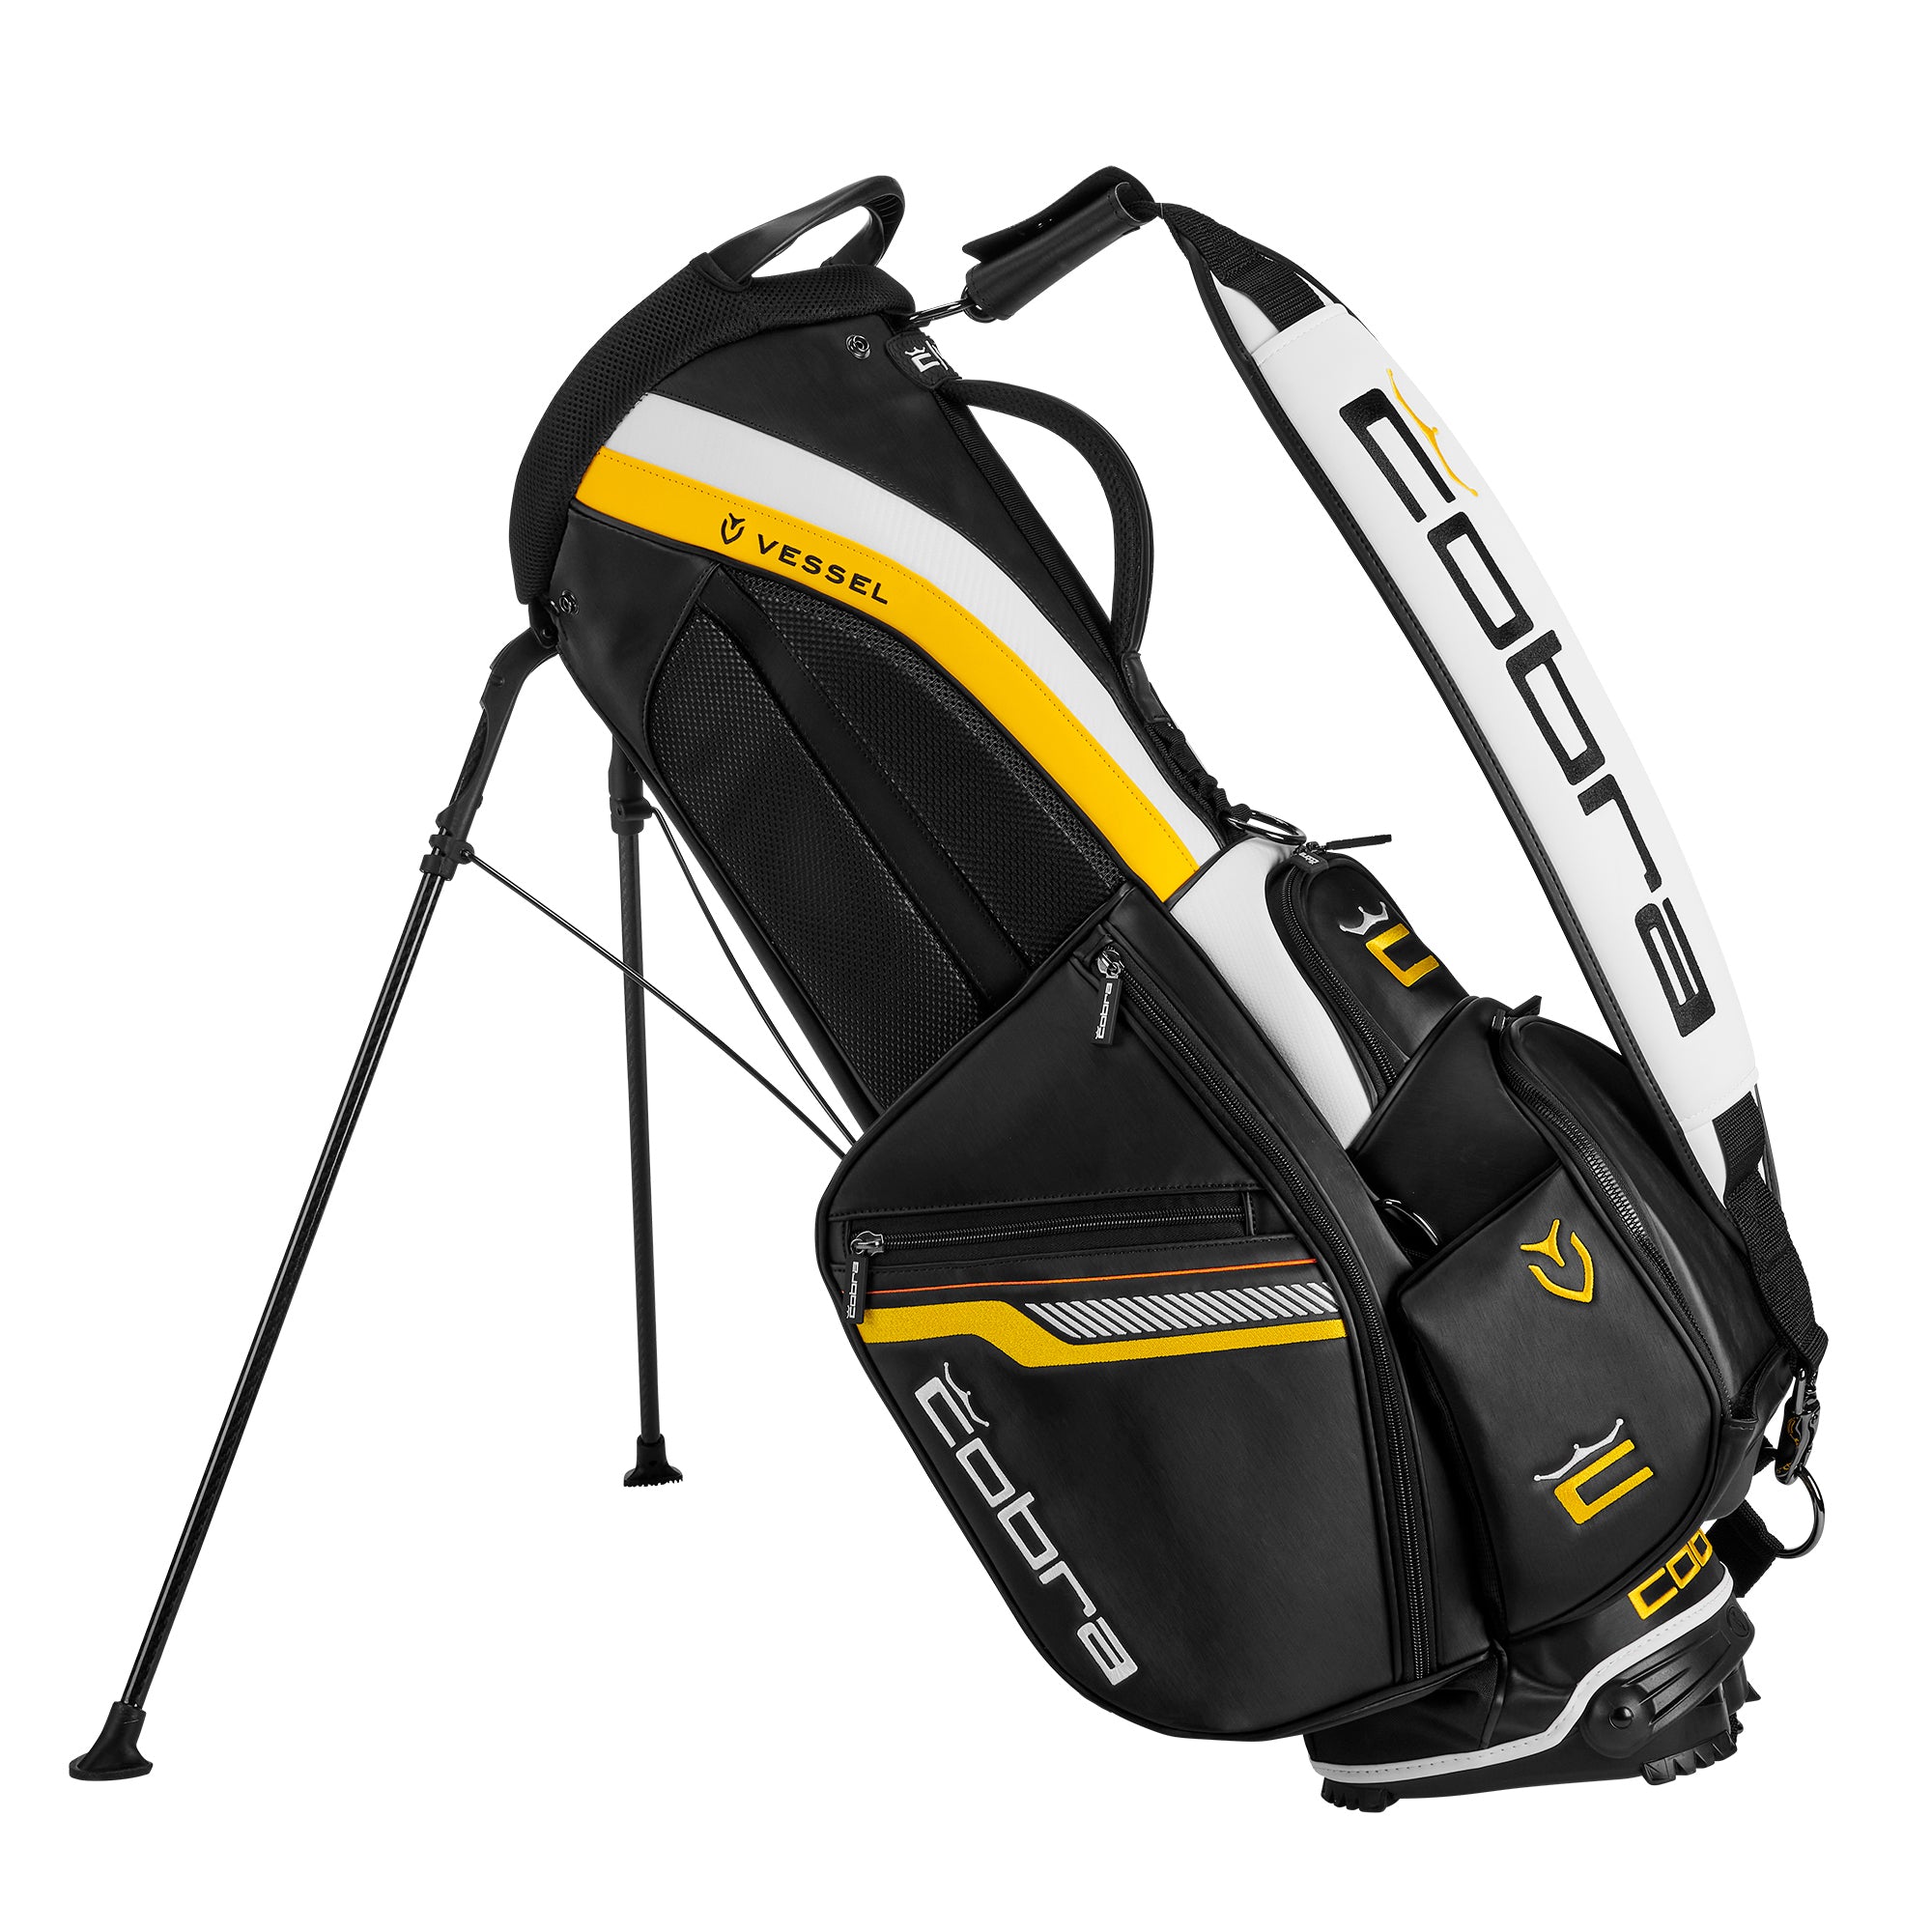 Custom Golf Tour Bags: Your Name, Your Logo, and Your Choice of Colors